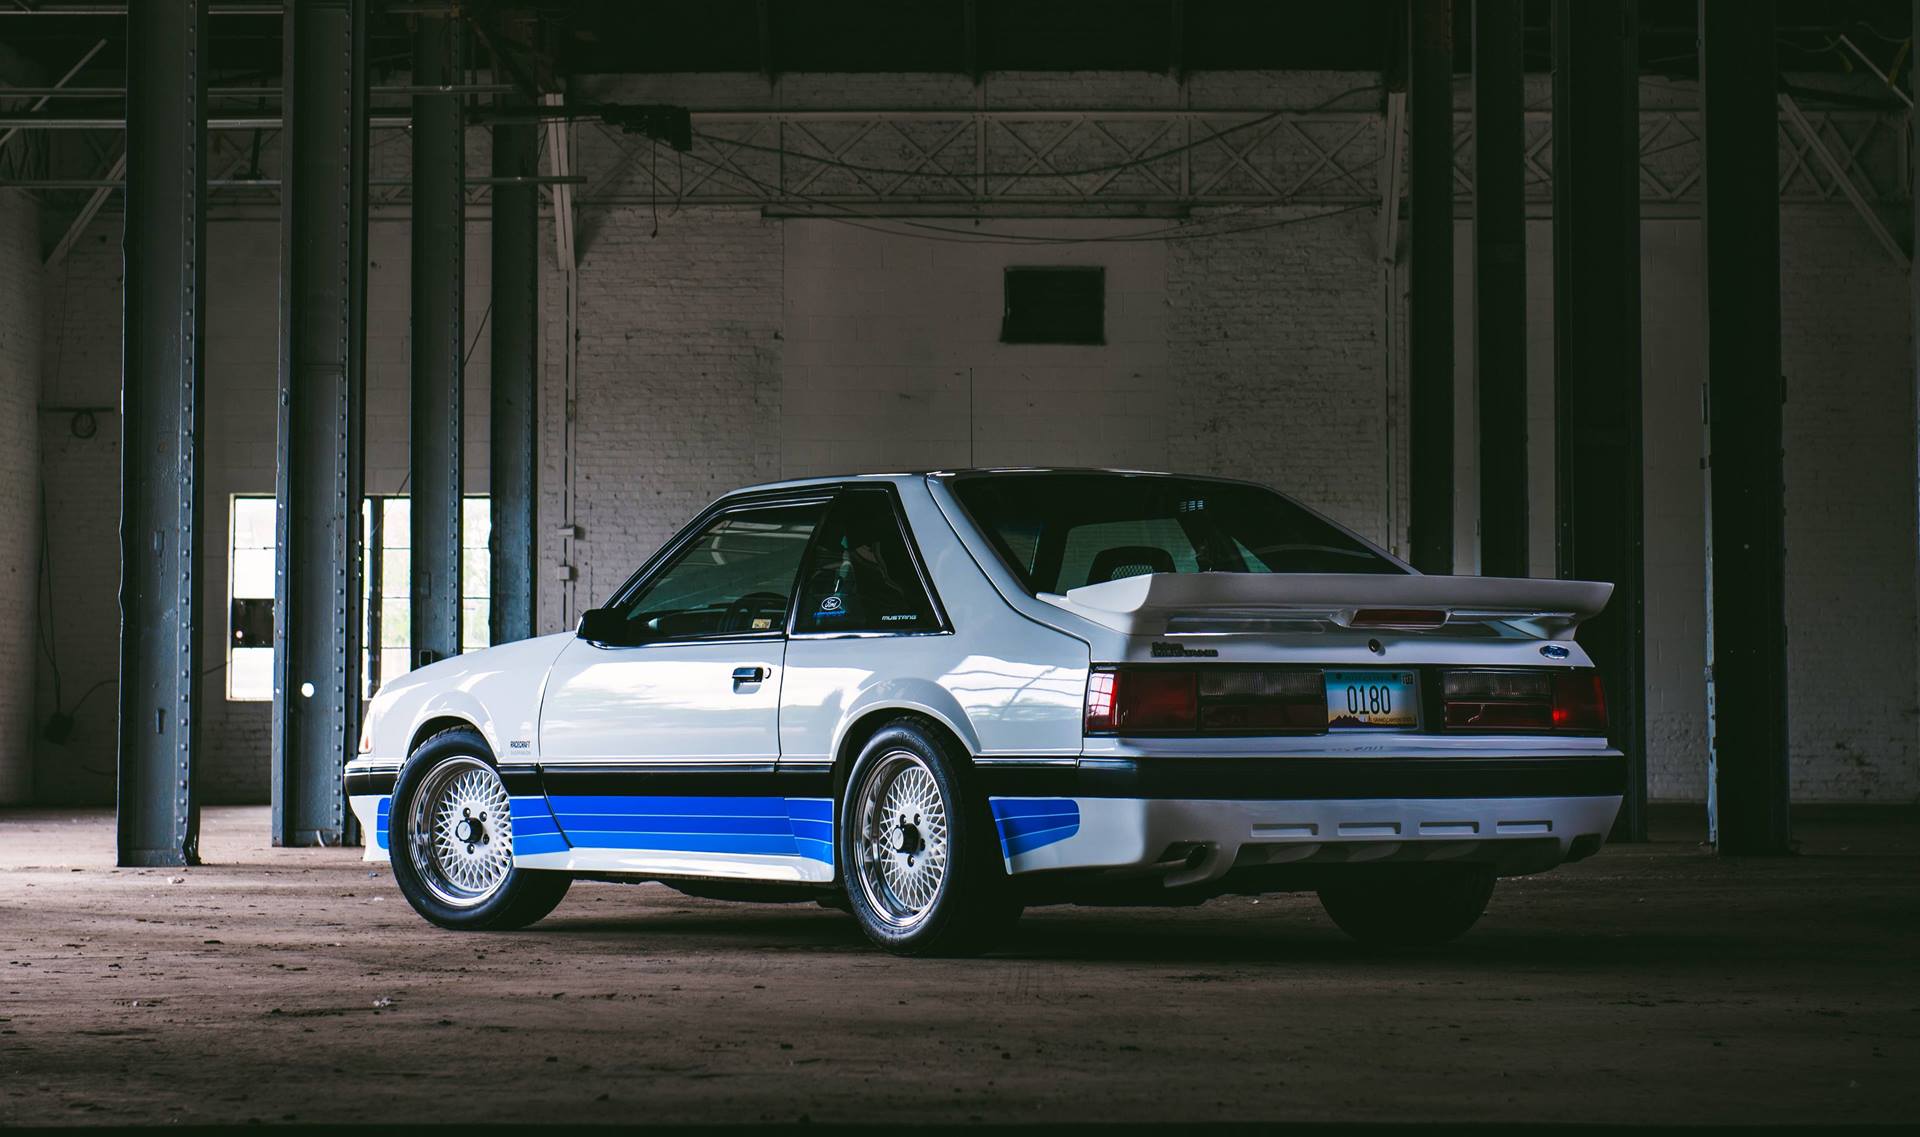 1987 Saleen Mustang - courtesy of Colin Comer